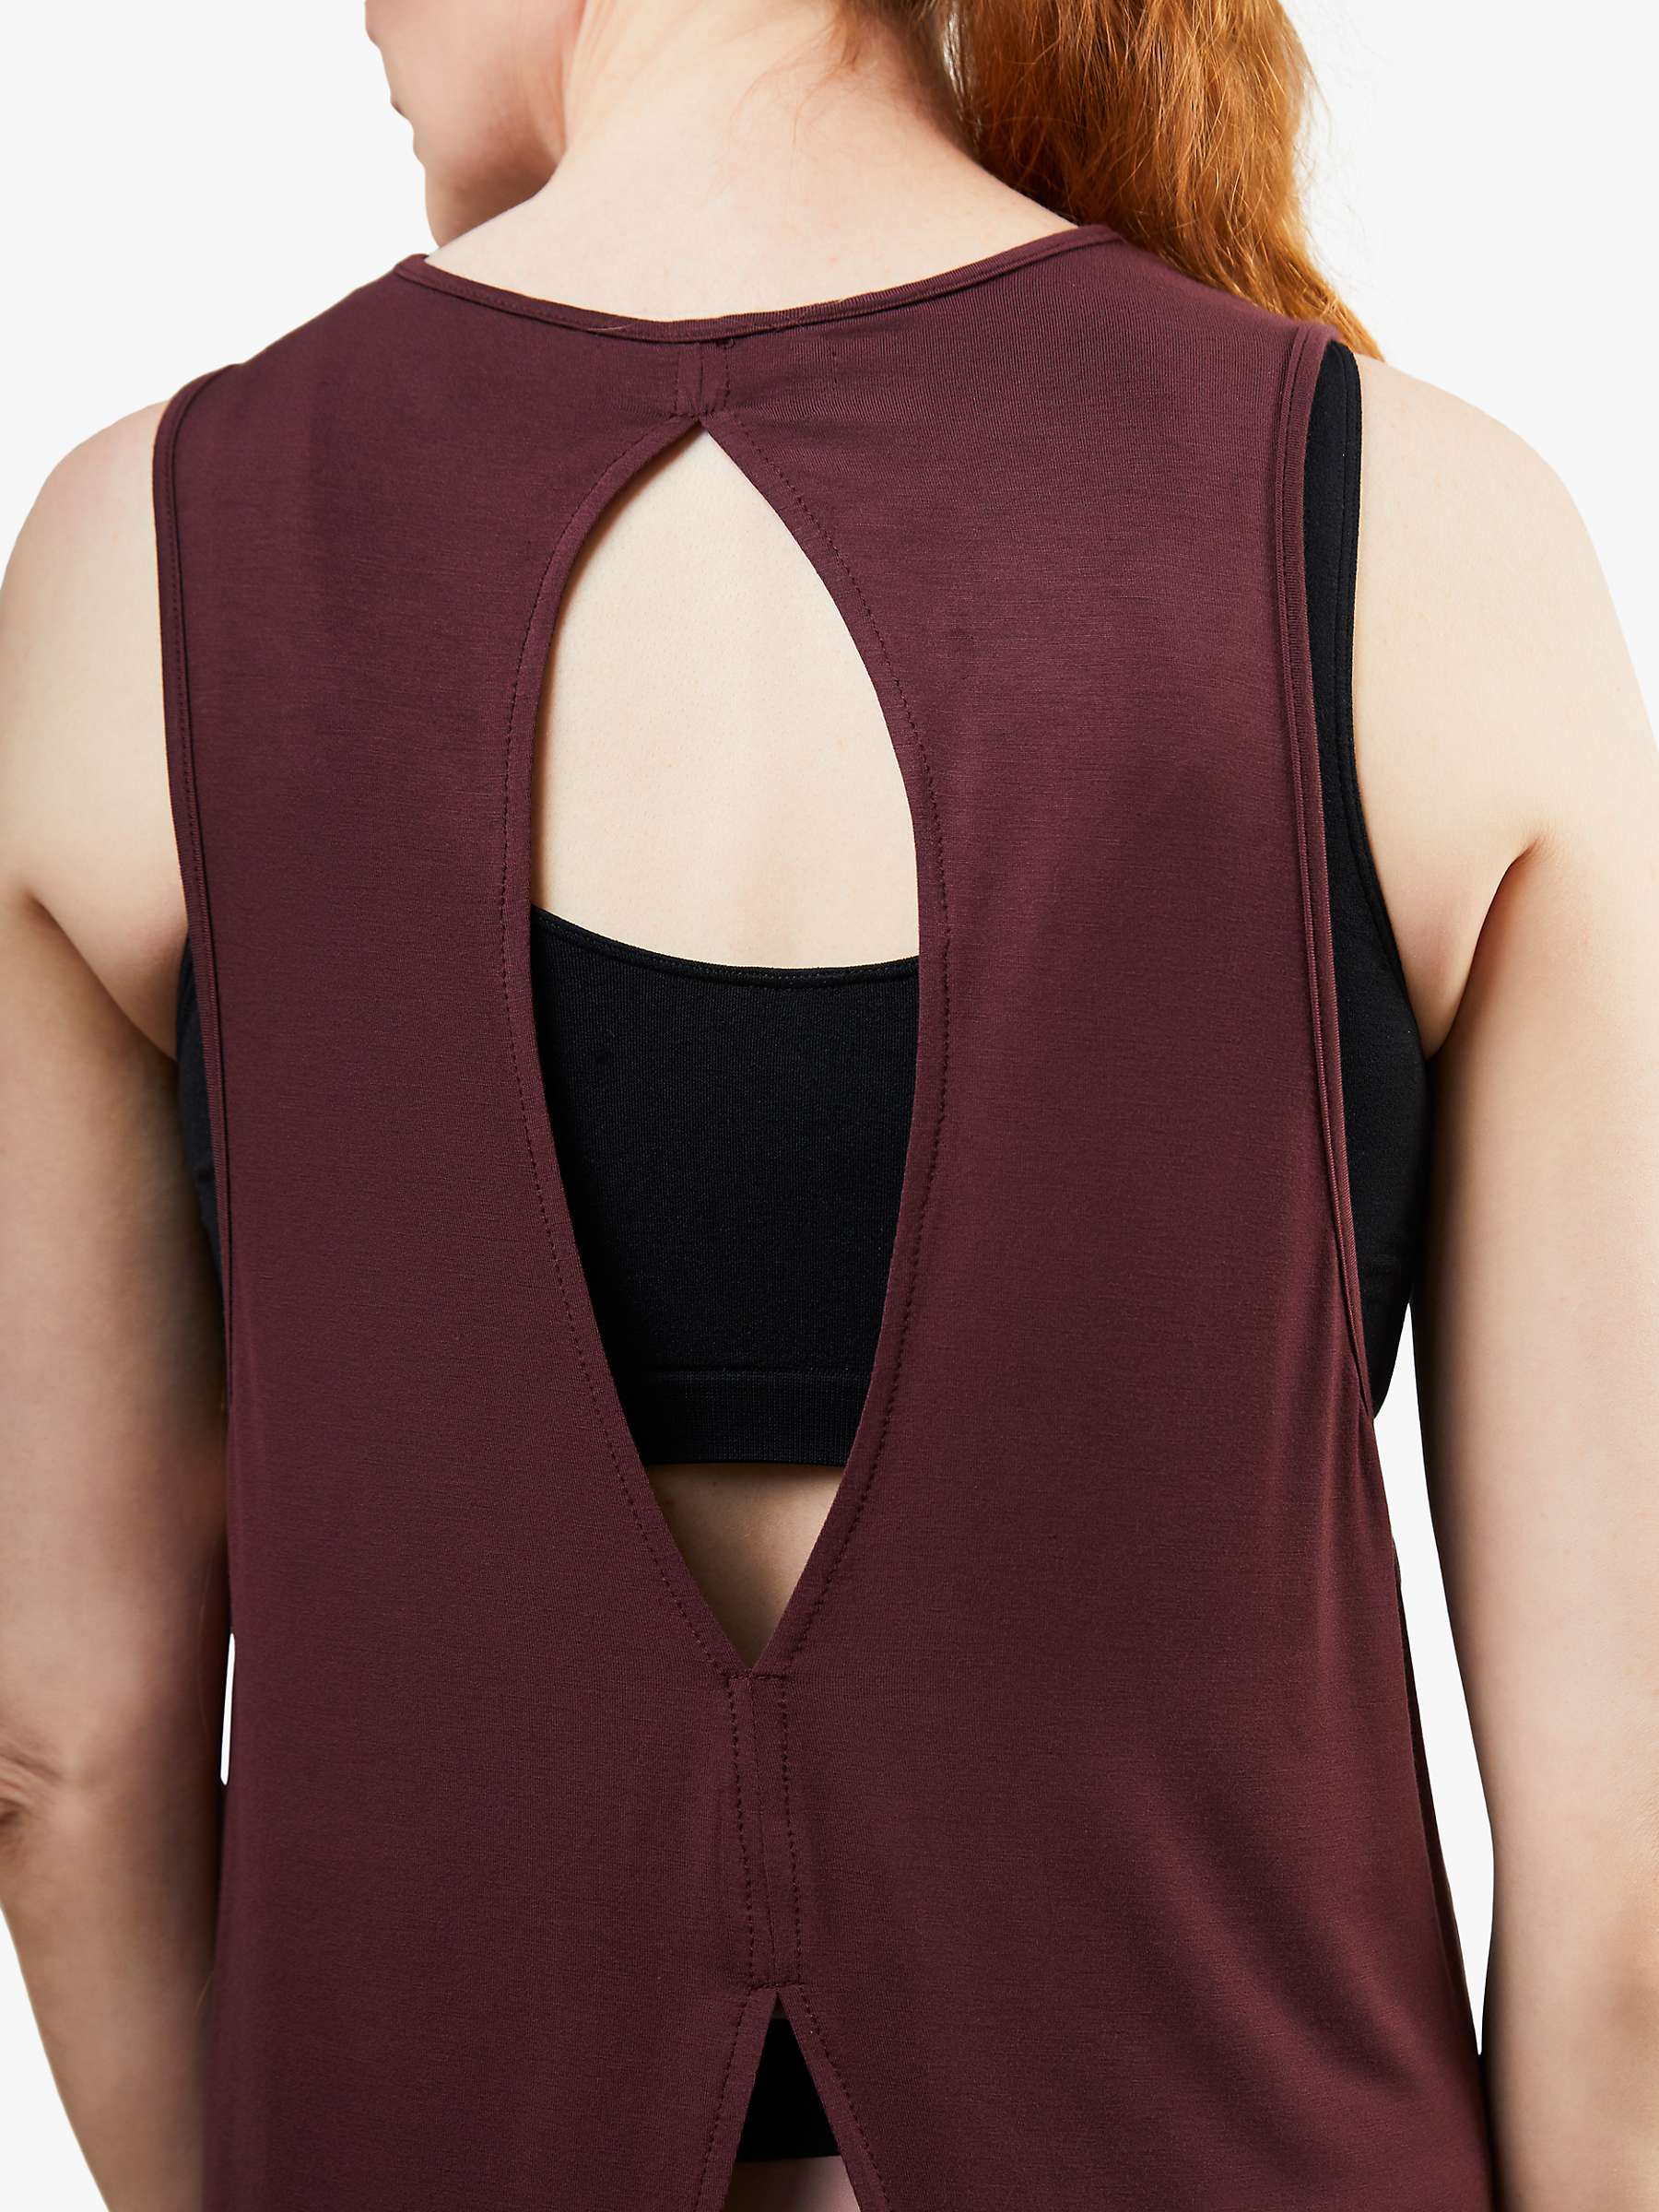 Buy Zozimus Activate Sports Tank Top Online at johnlewis.com